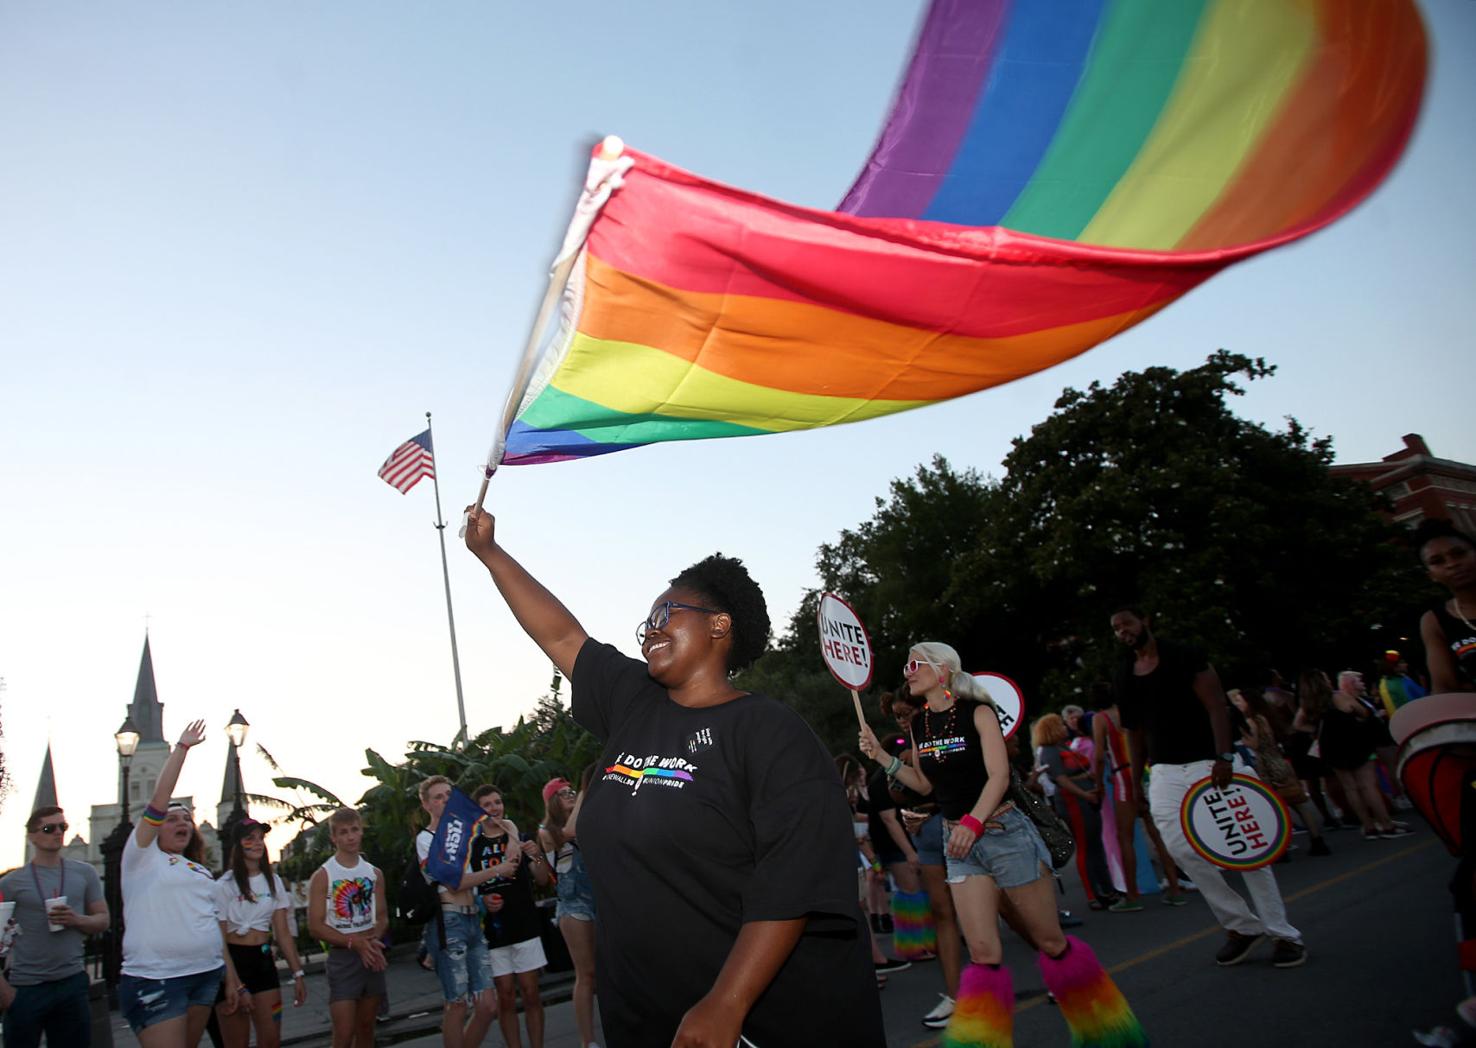 2022 Pride parade Shorter, fewer floats, over budget, but still happy